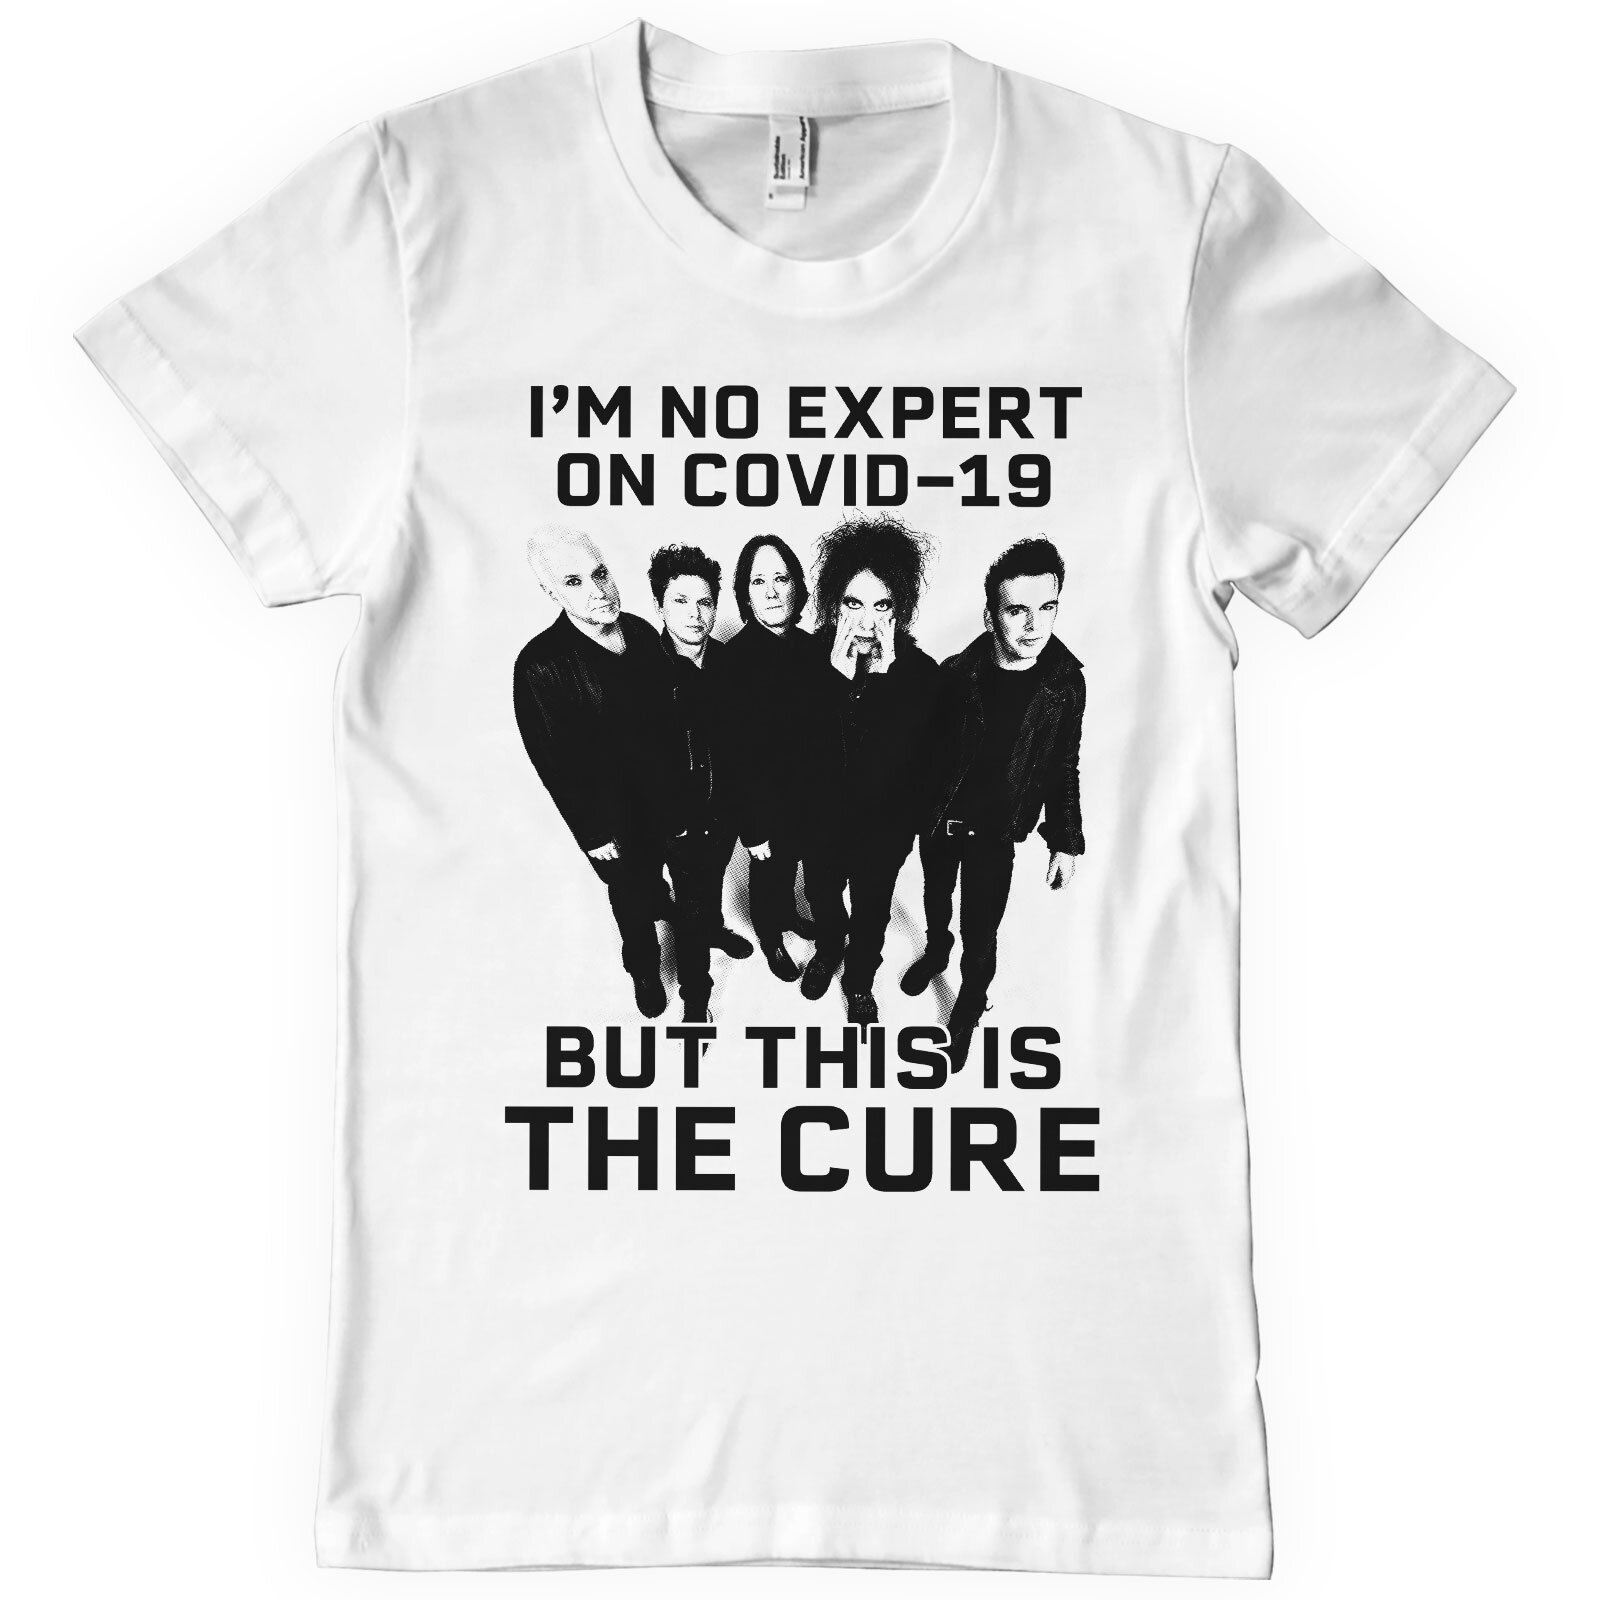 Covid-19 - The Cure T-Shirt